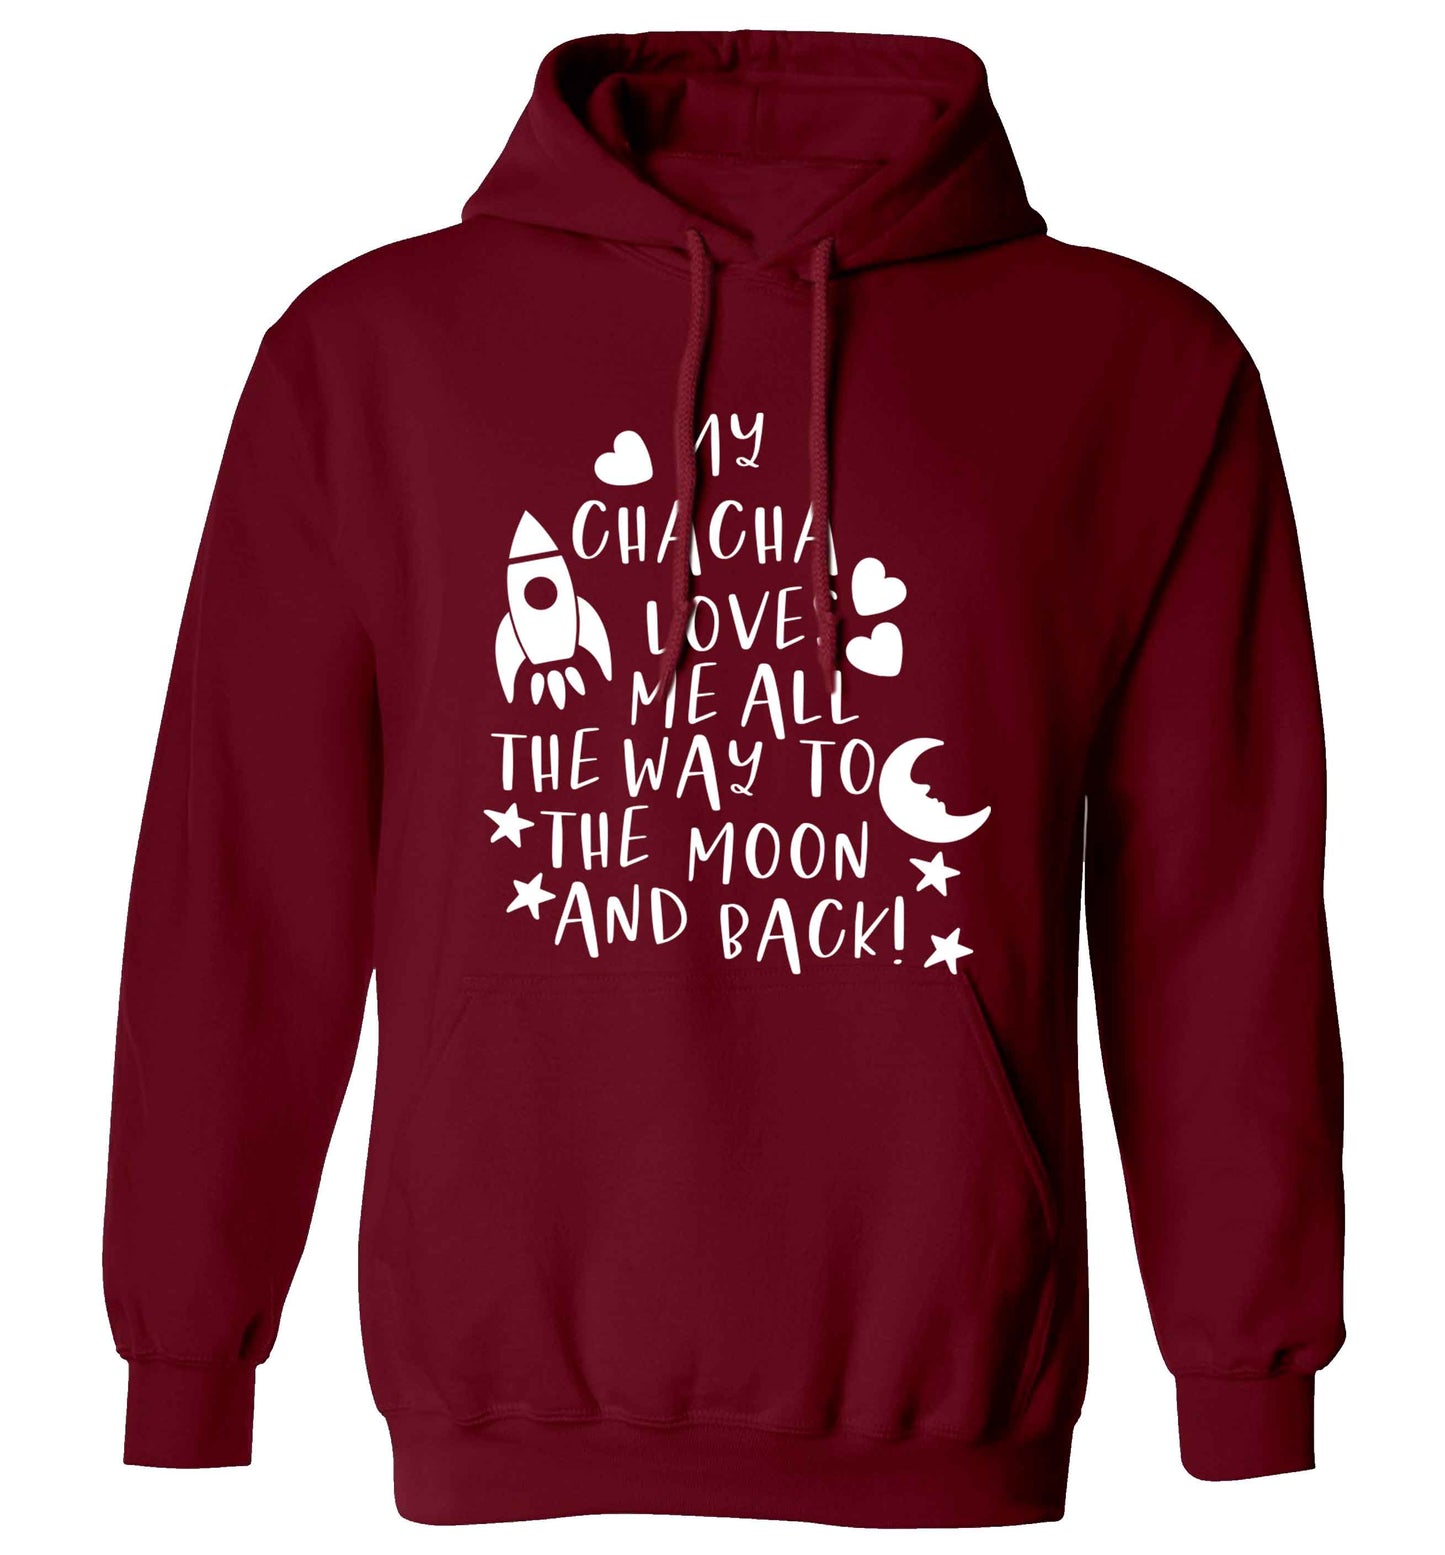 My chacha loves me all the way to the moon and back adults unisex maroon hoodie 2XL